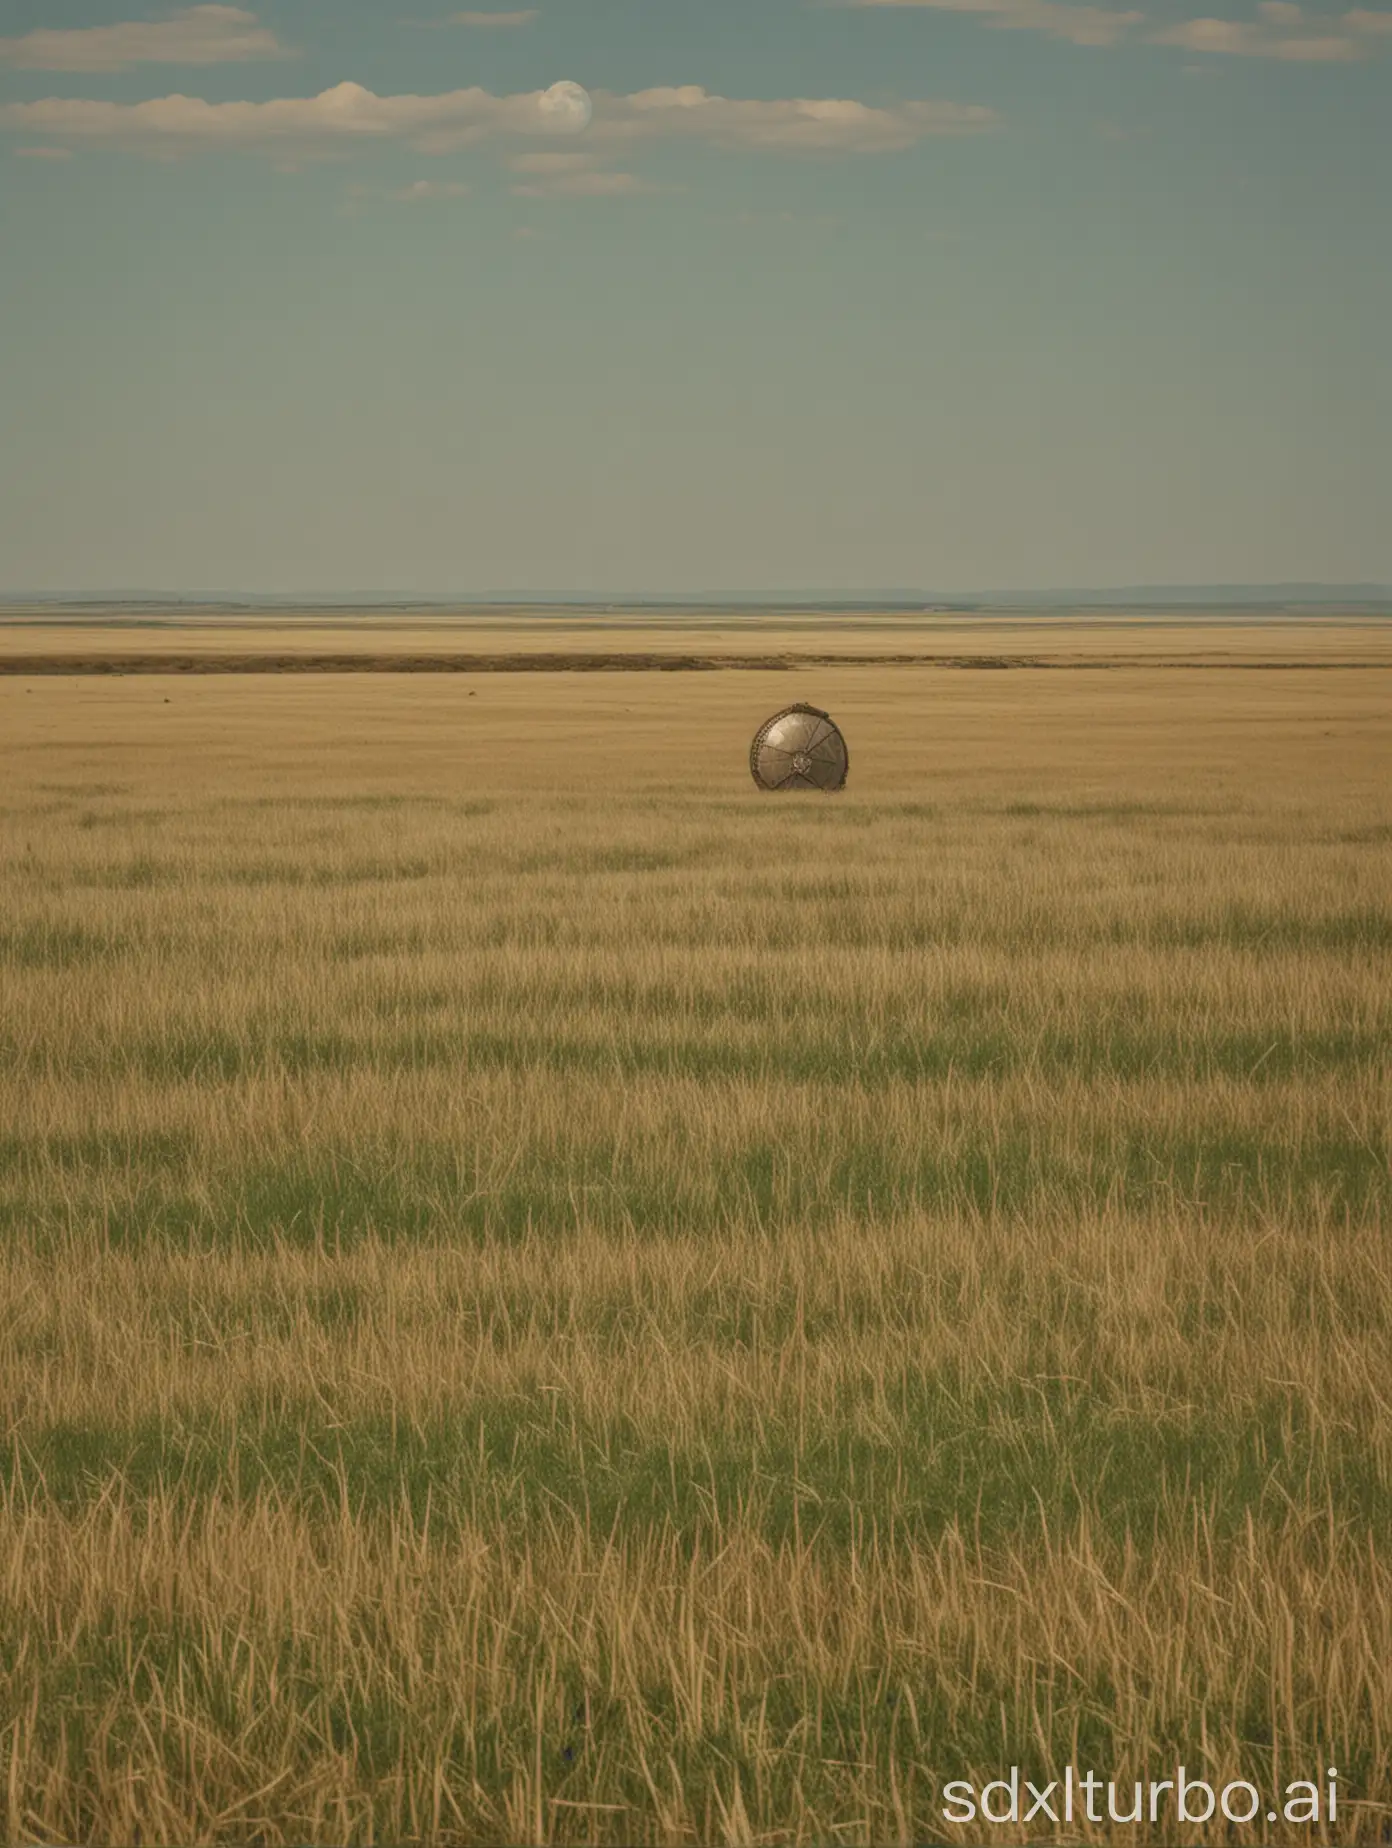 on the plains, can be seen the planet, pentax 55mm f/1.6 helios-44m